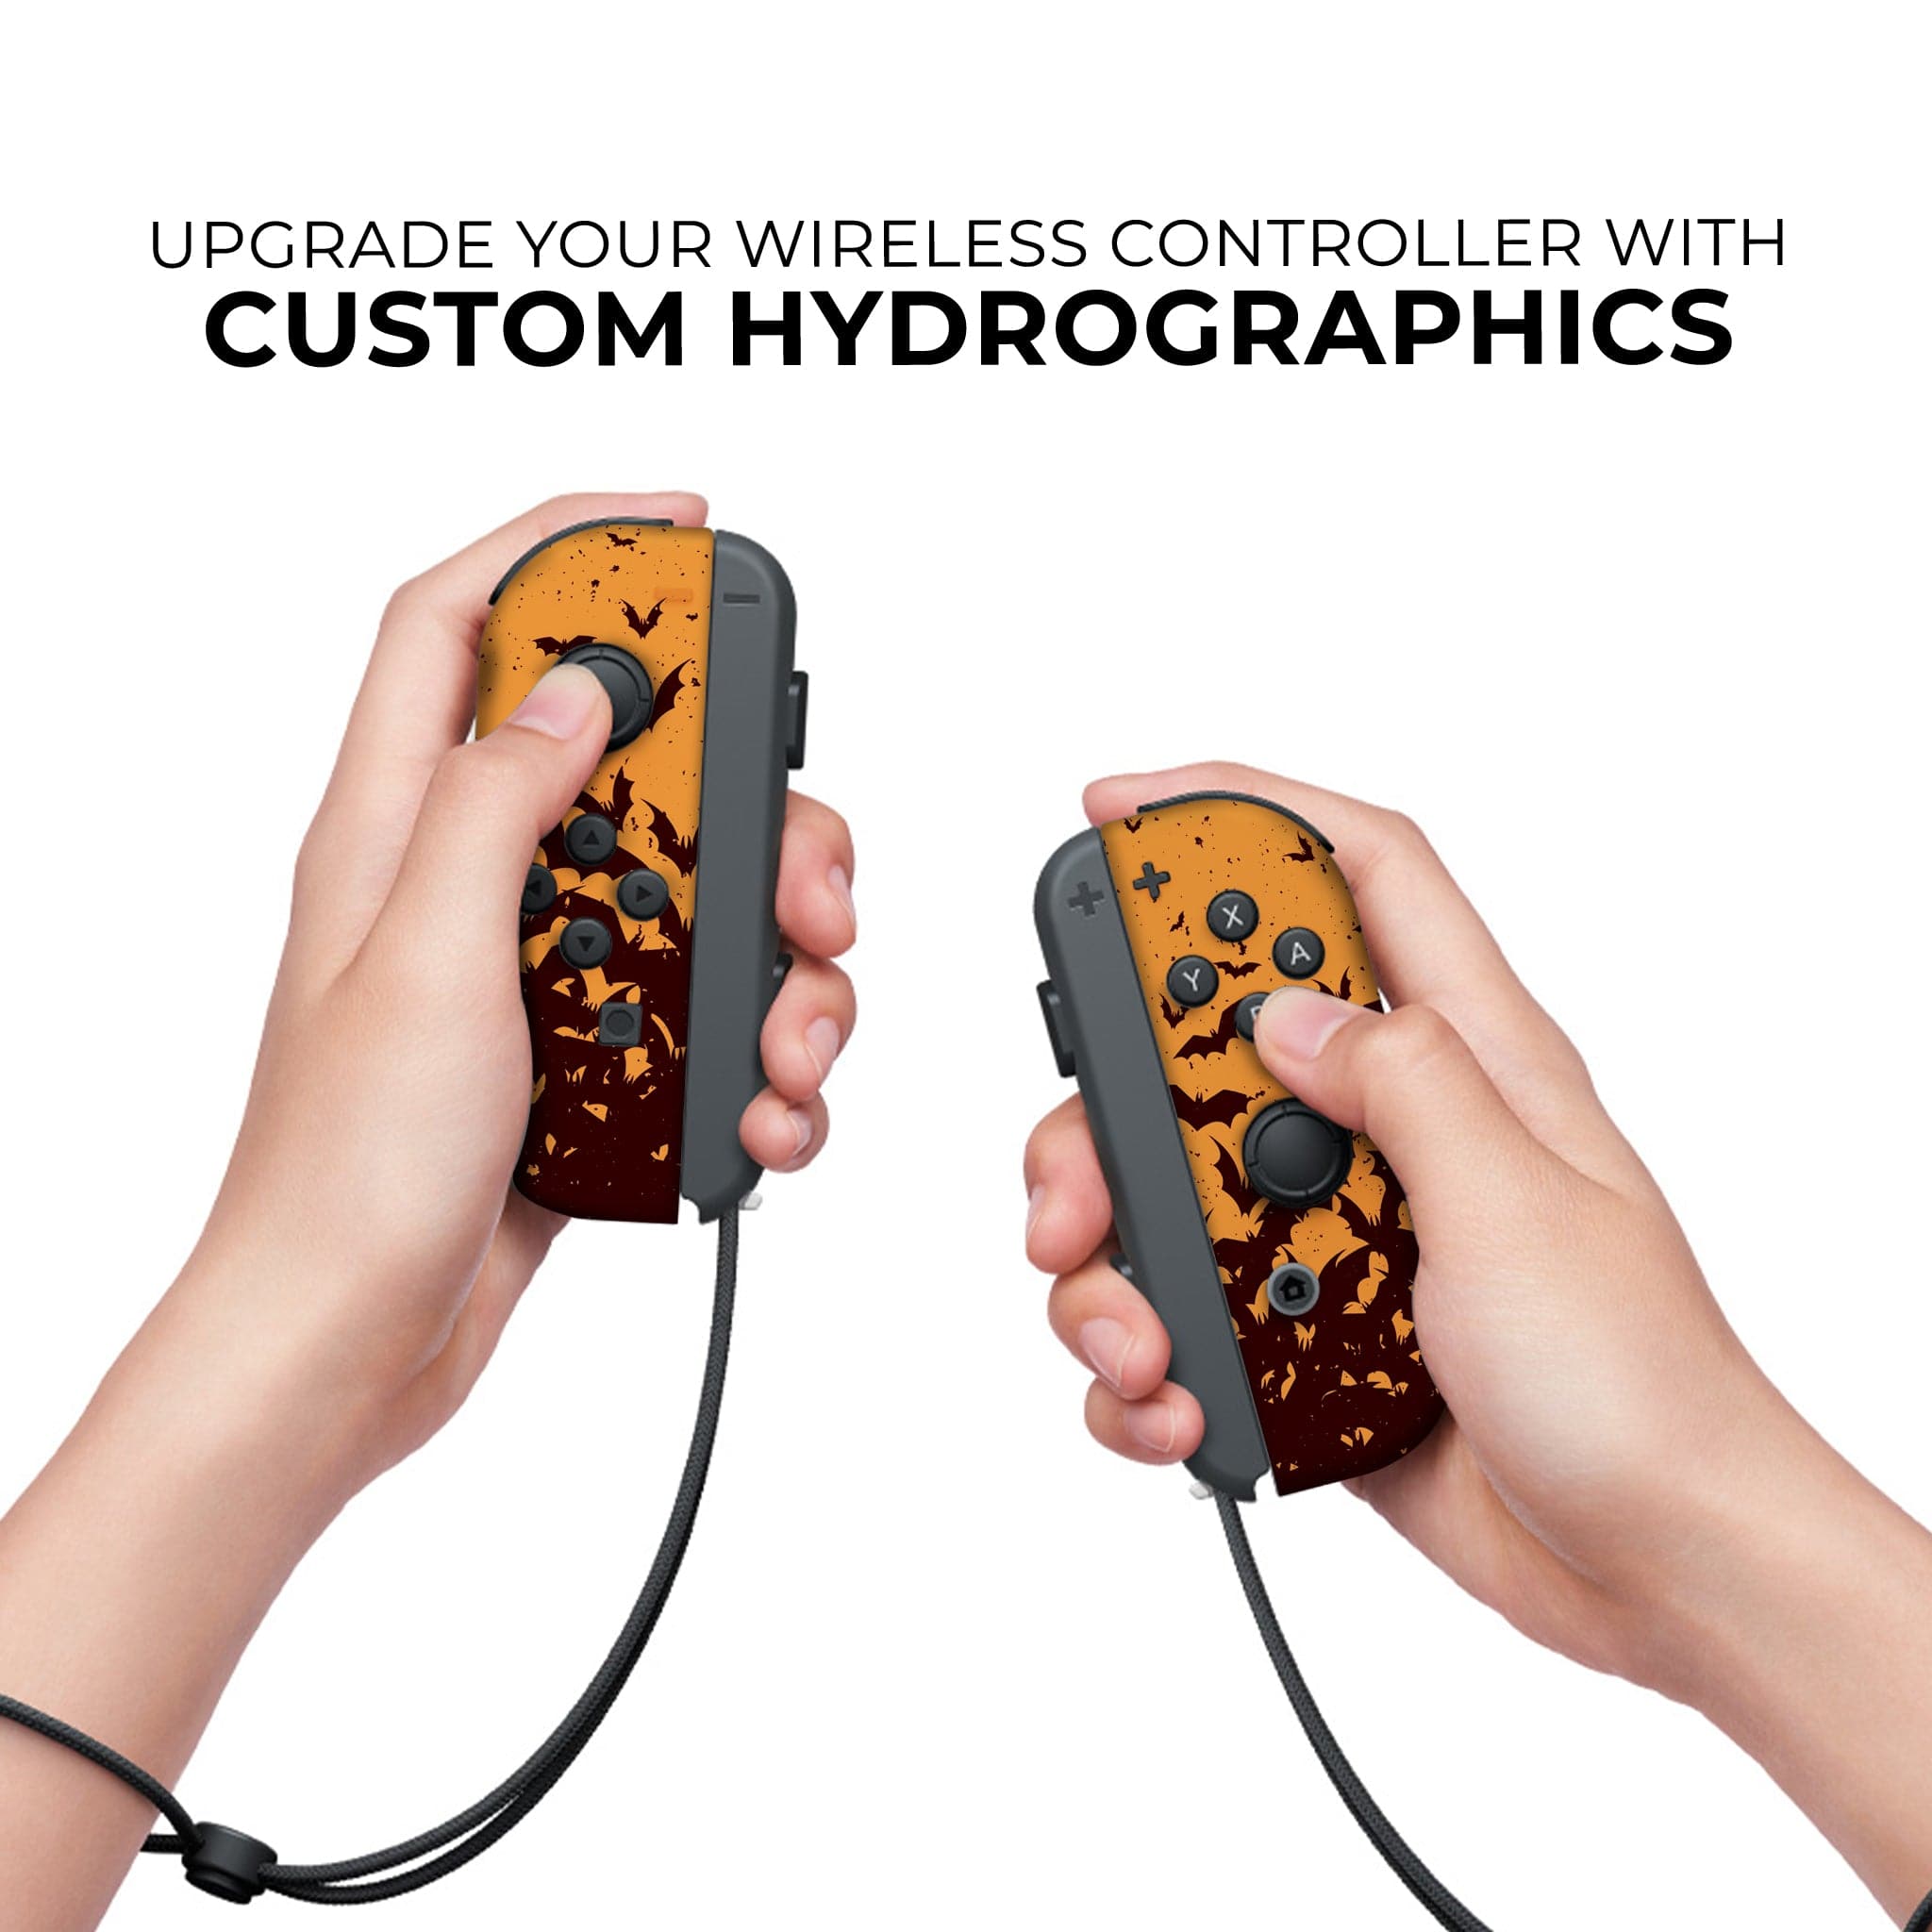 Bats Inspired Nintendo Switch Joy-Con Left and Right Switch Controllers